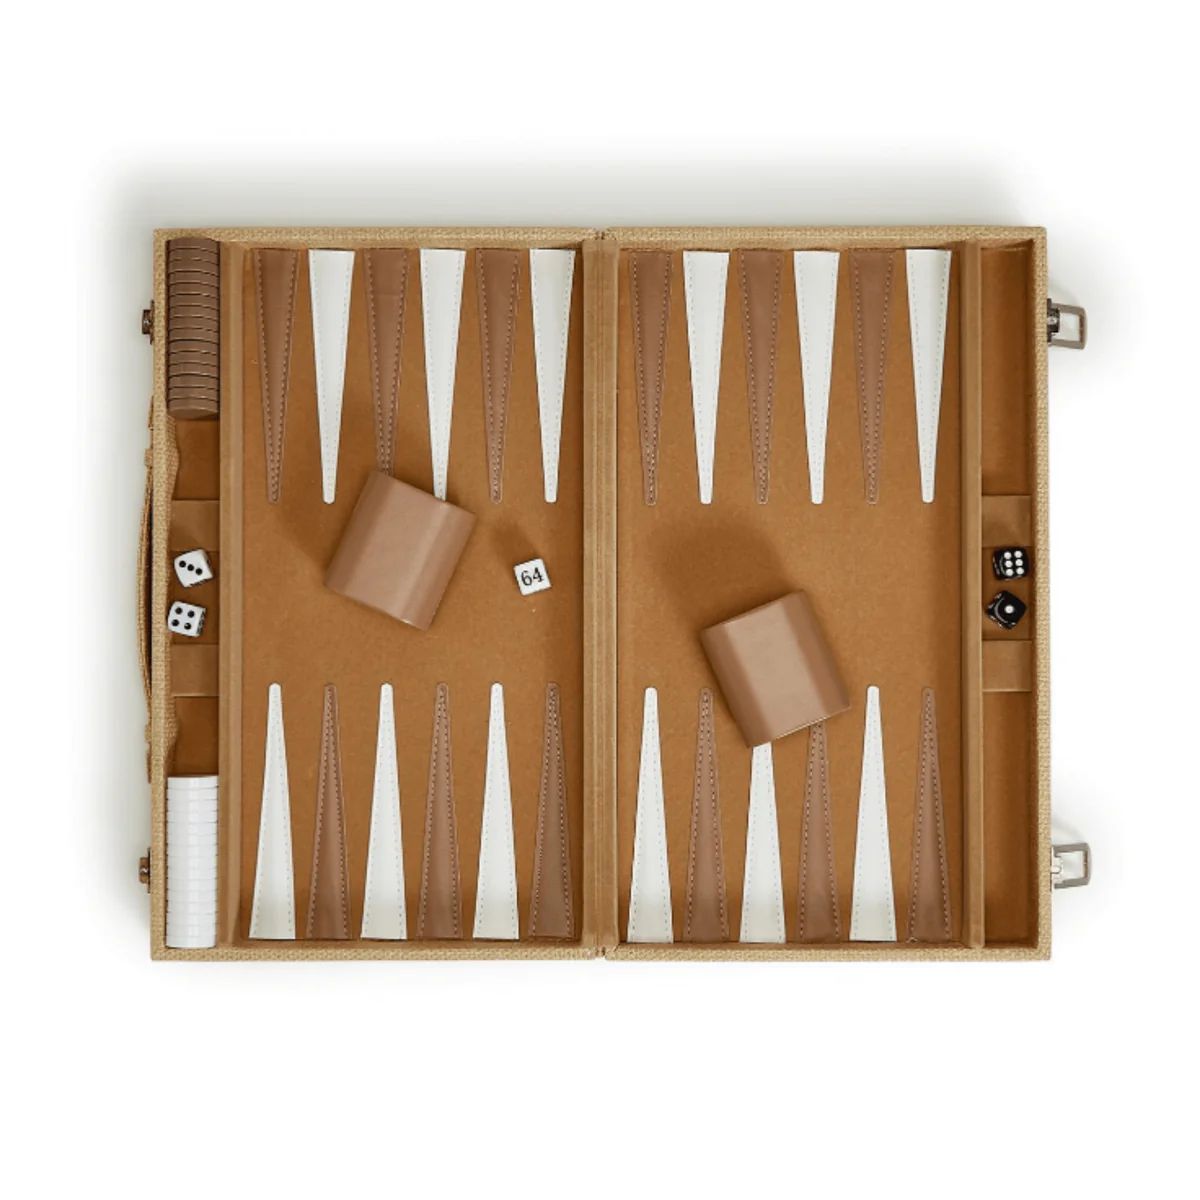 Terra Cane Backgammon Game Set | The Well Appointed House, LLC